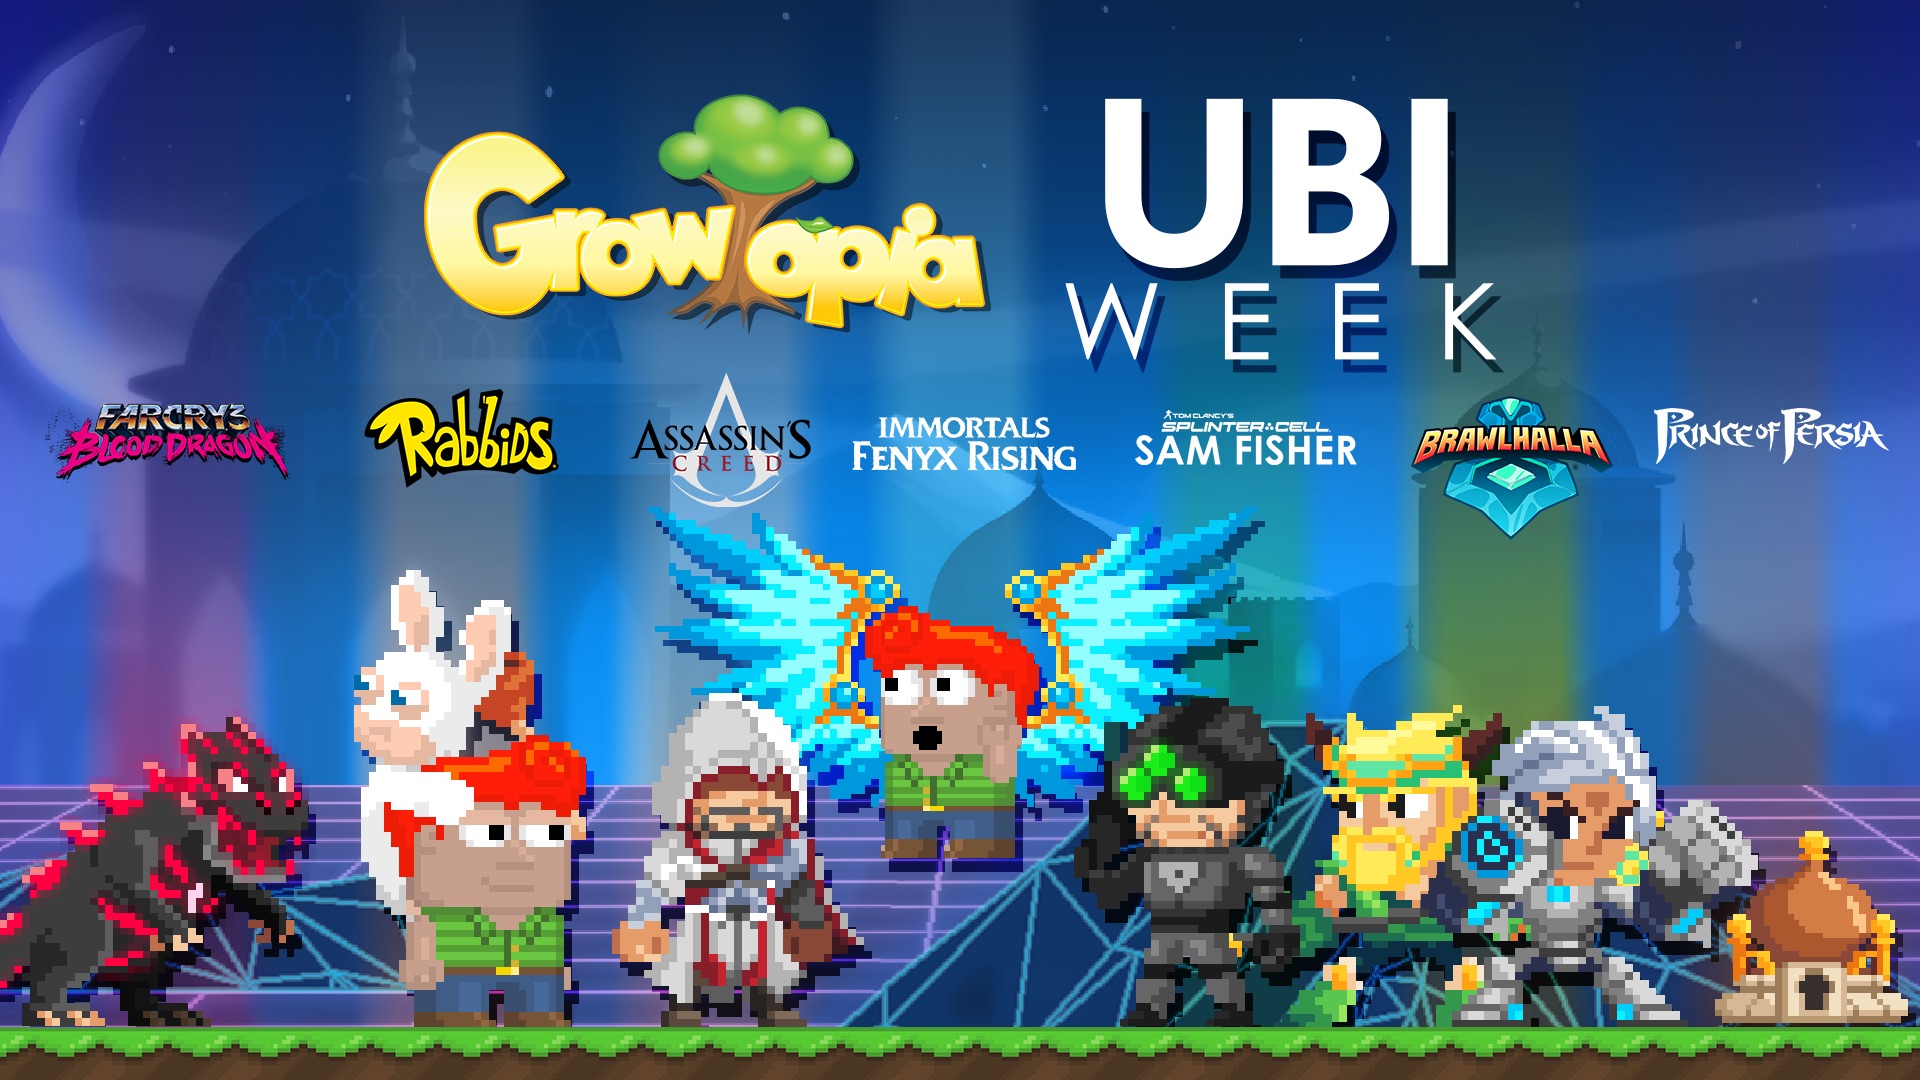 Assassin’s Creed, Rabbids, Far Cry and More Coming to Growtopia in January Crossover Event